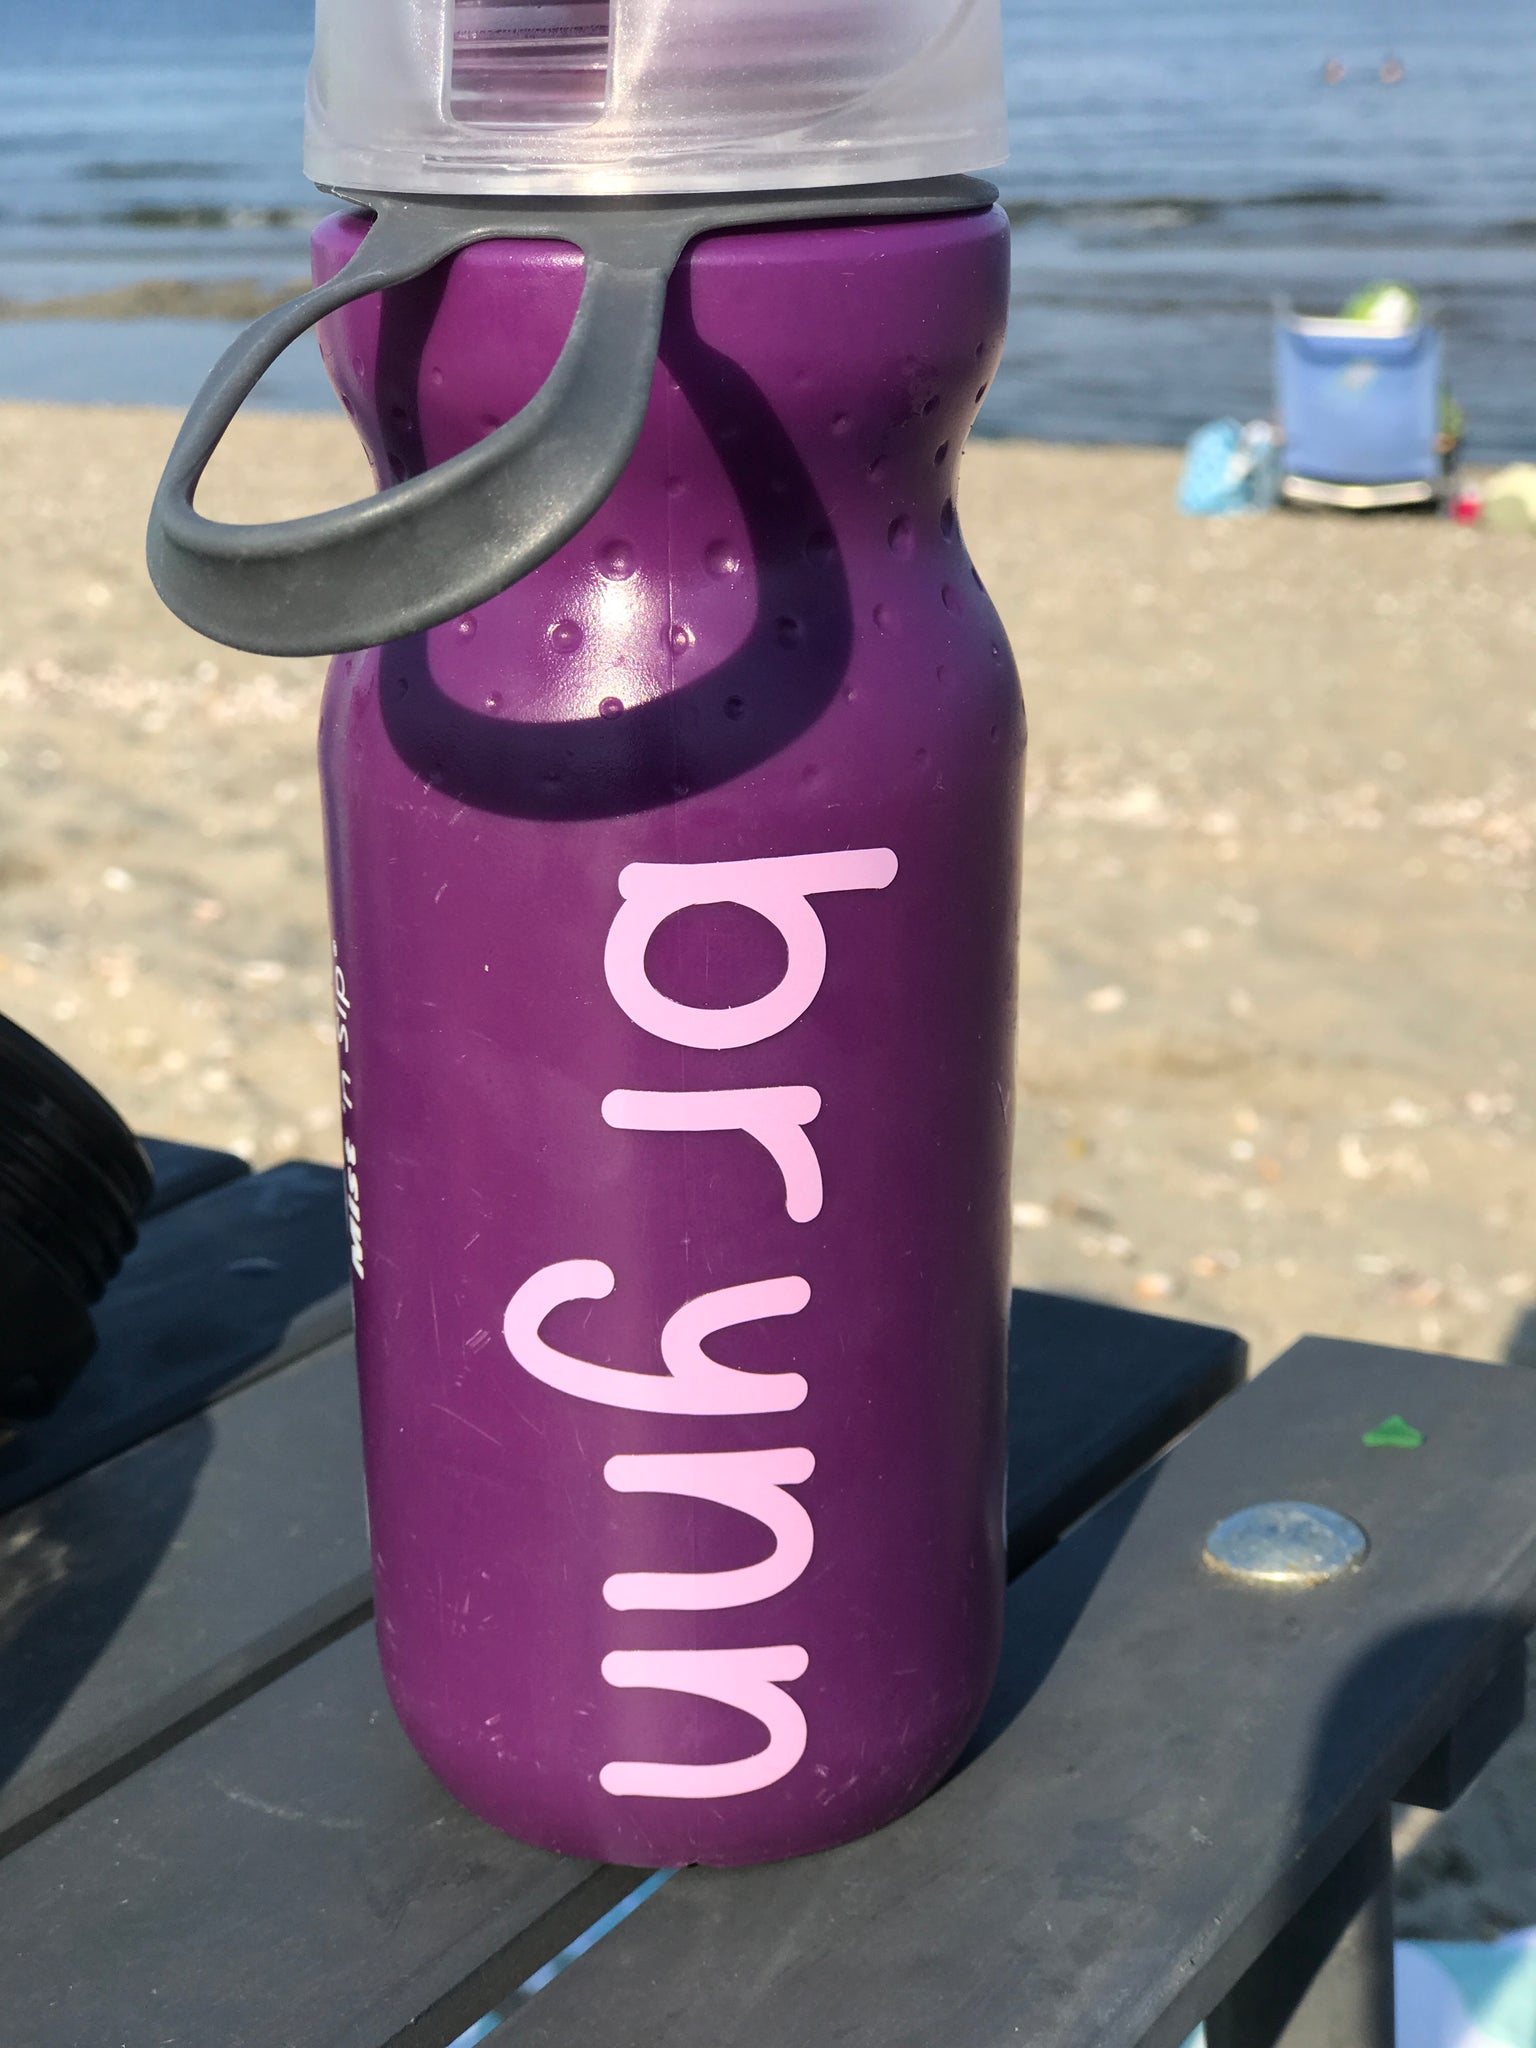 Personalized O2 Cool ArcticSqueeze Insulated Mist N Sip Squeeze Bottle